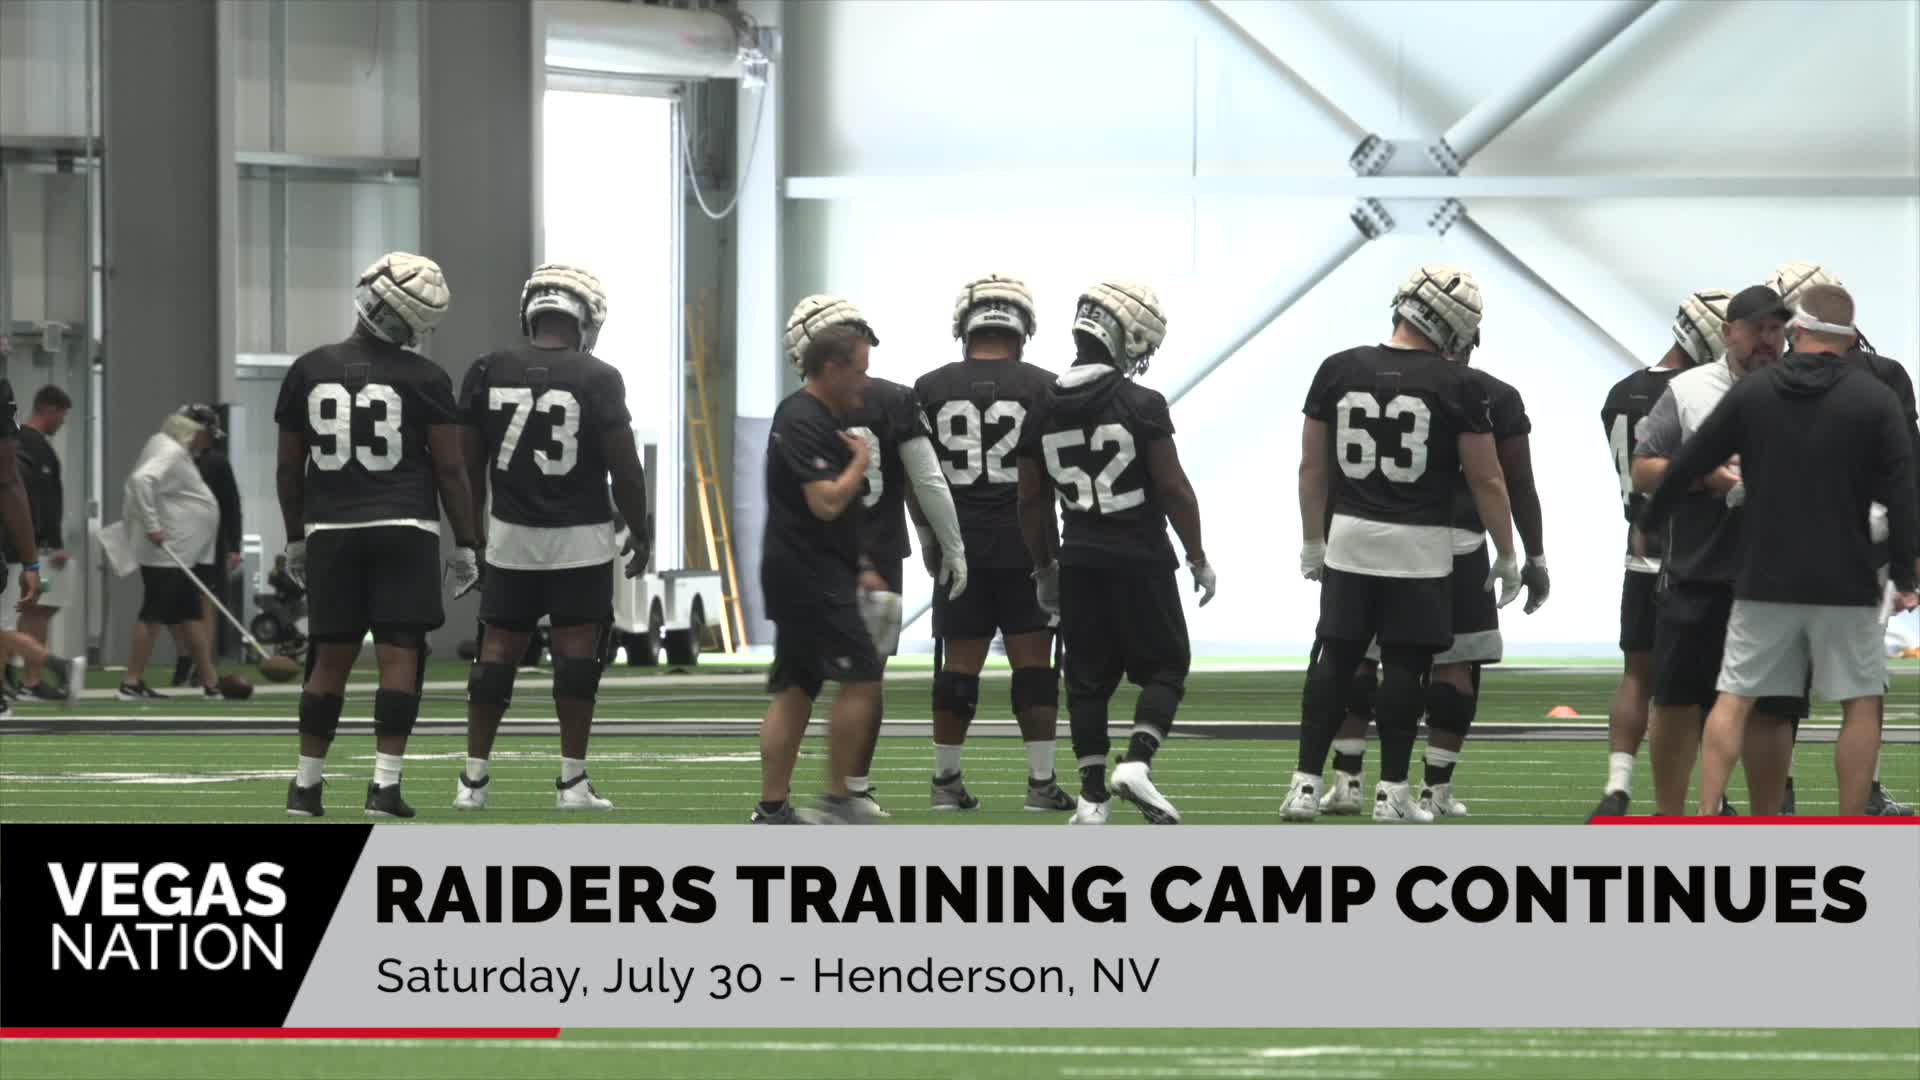 Sights and Sounds from Raiders Training Camp - Day 8